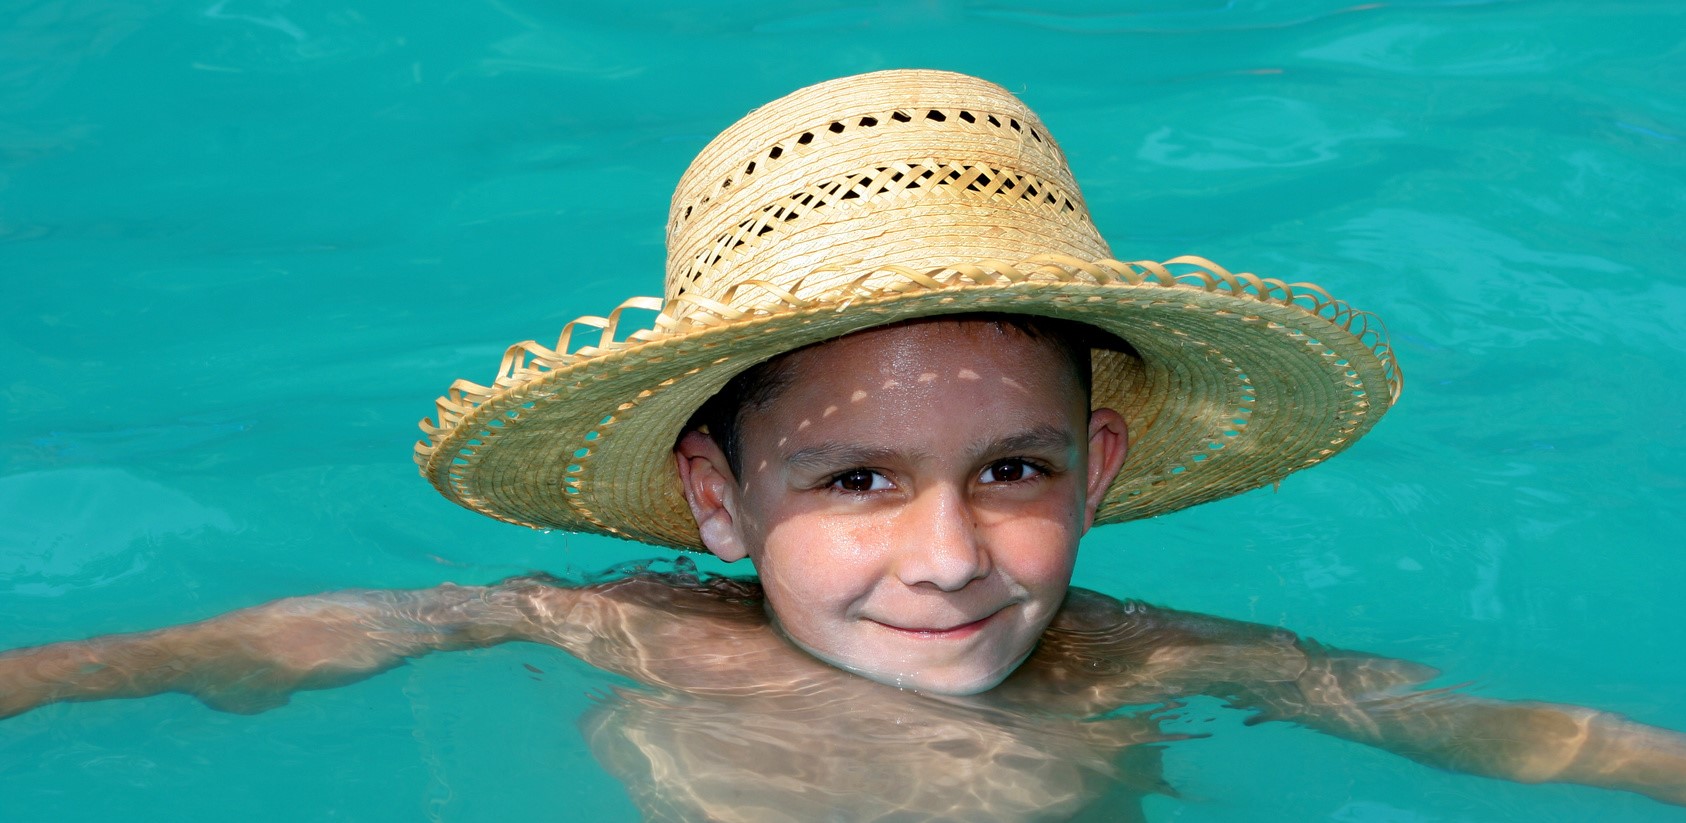 6 Ways to Stay Cool and Save Energy | Close-up of small boy with sunhat swimming in pool